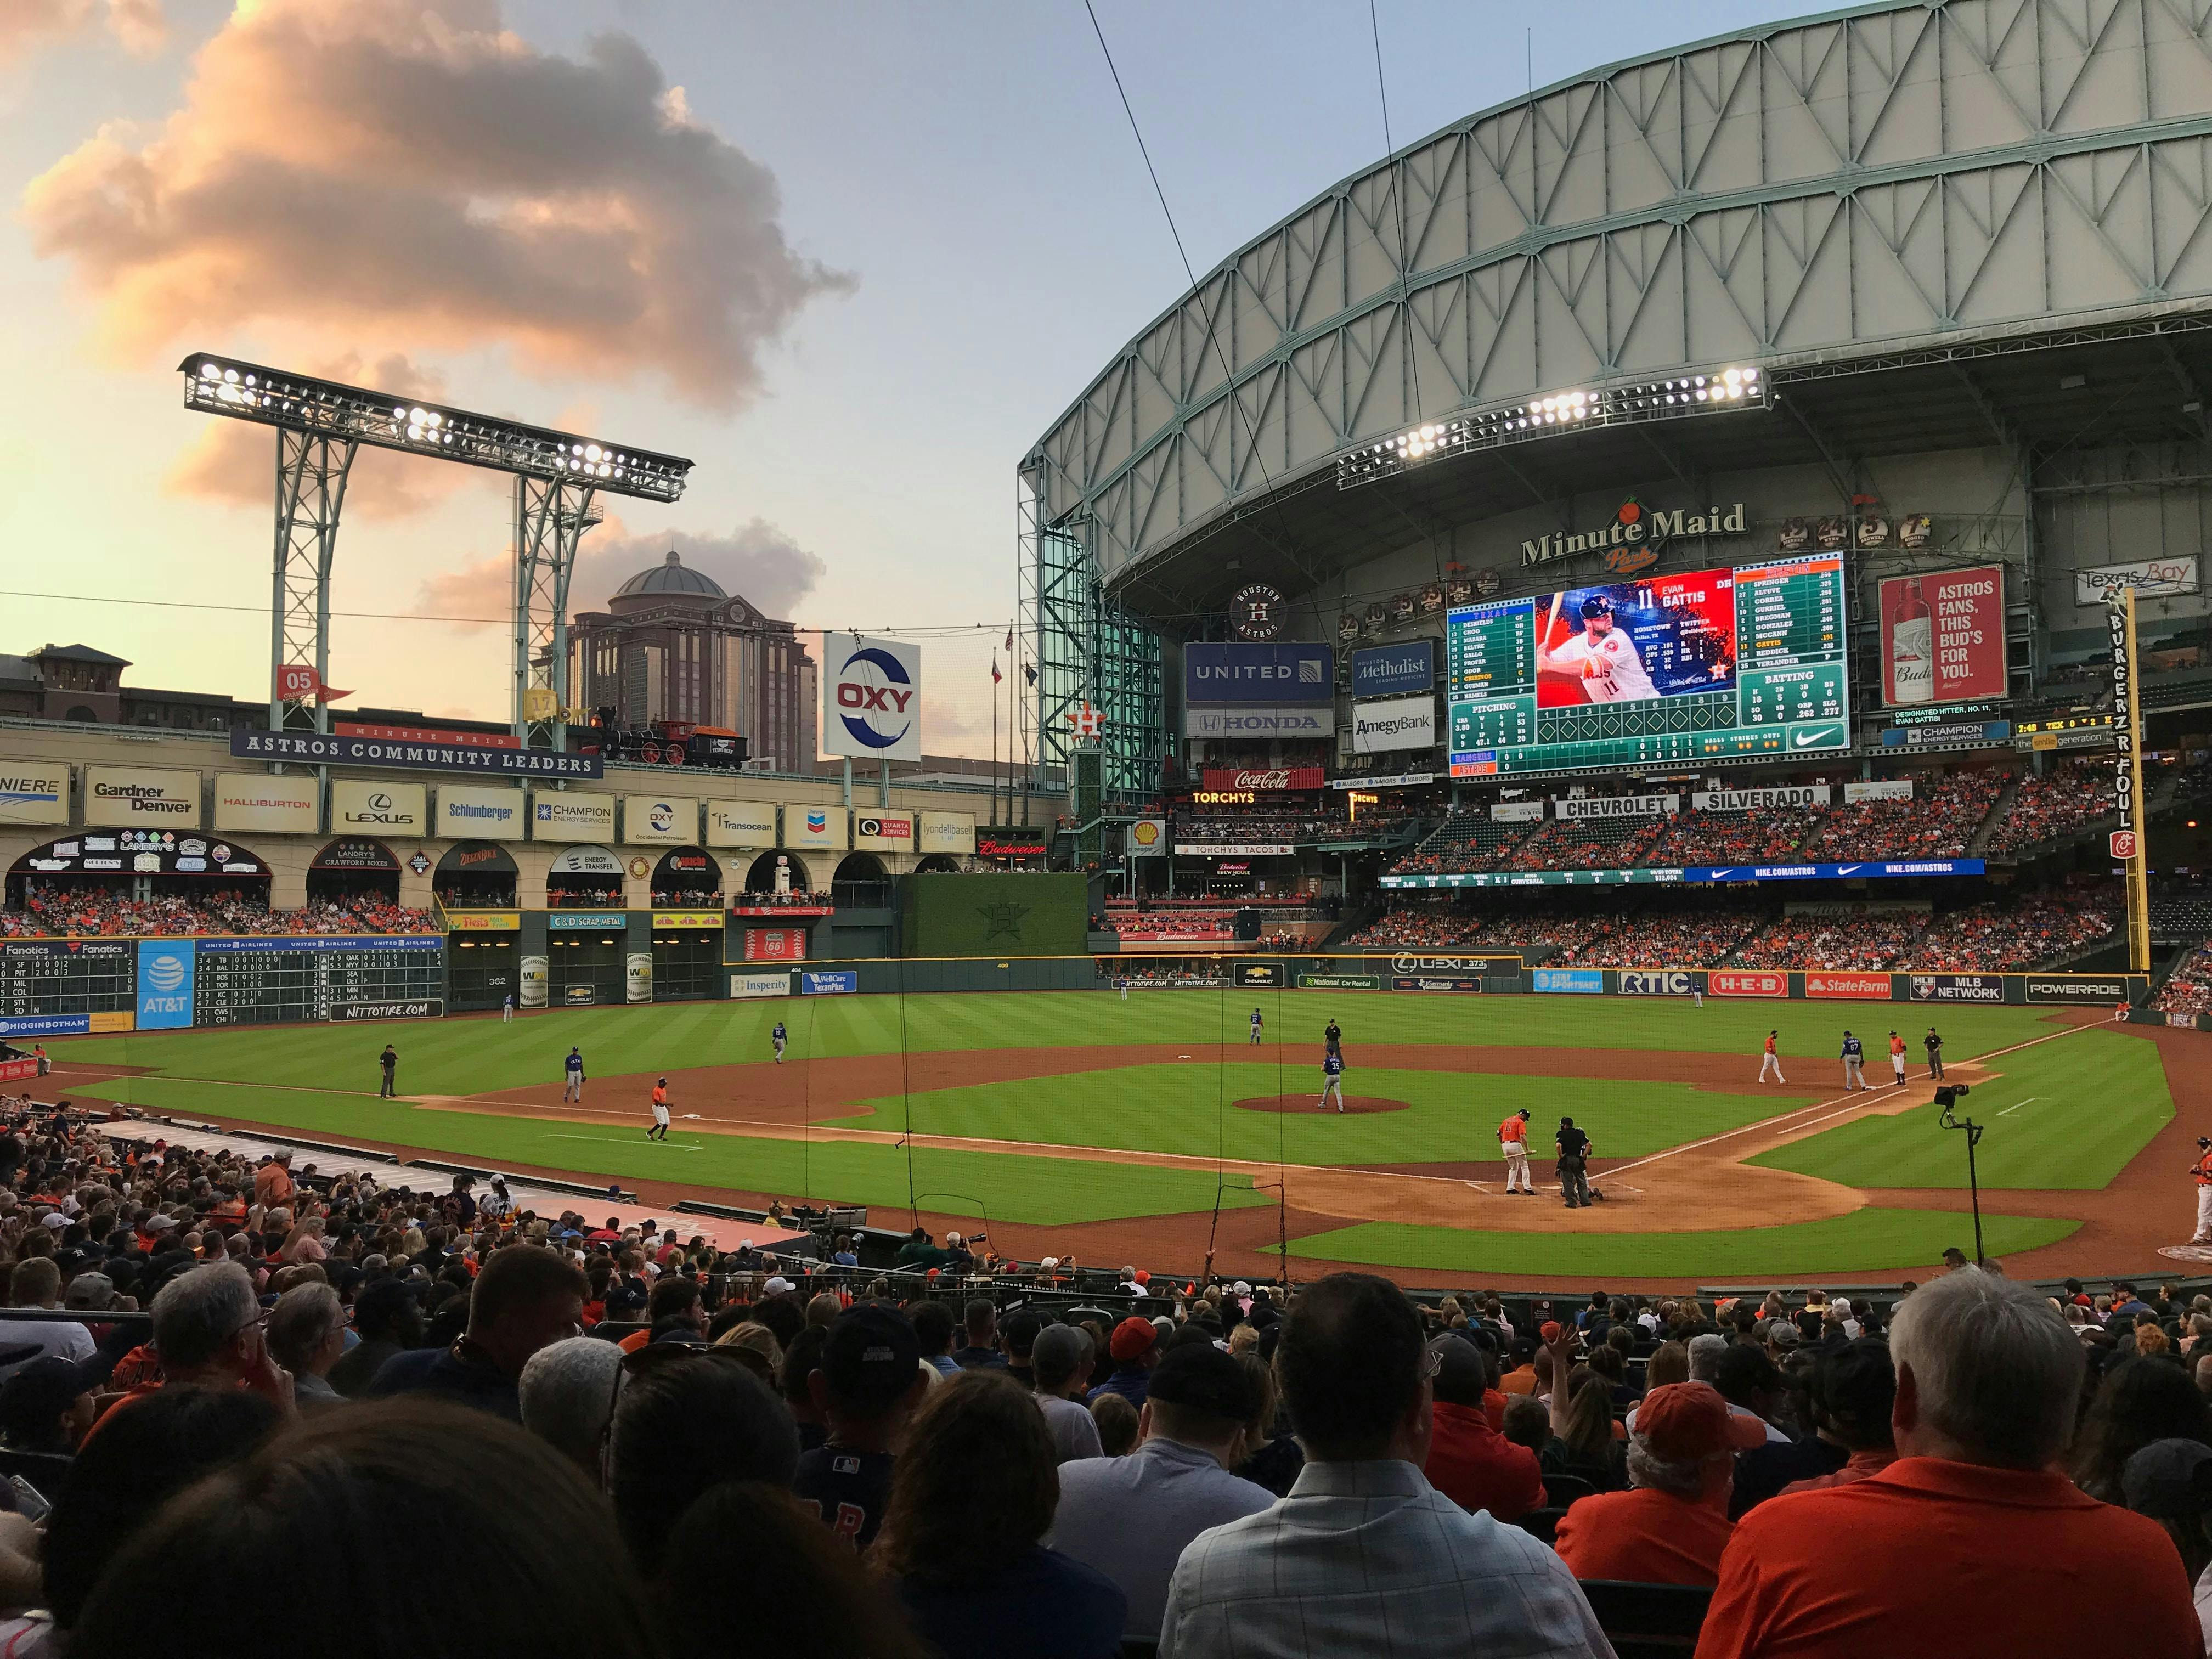 Policies and Procedures at Minute Maid Park